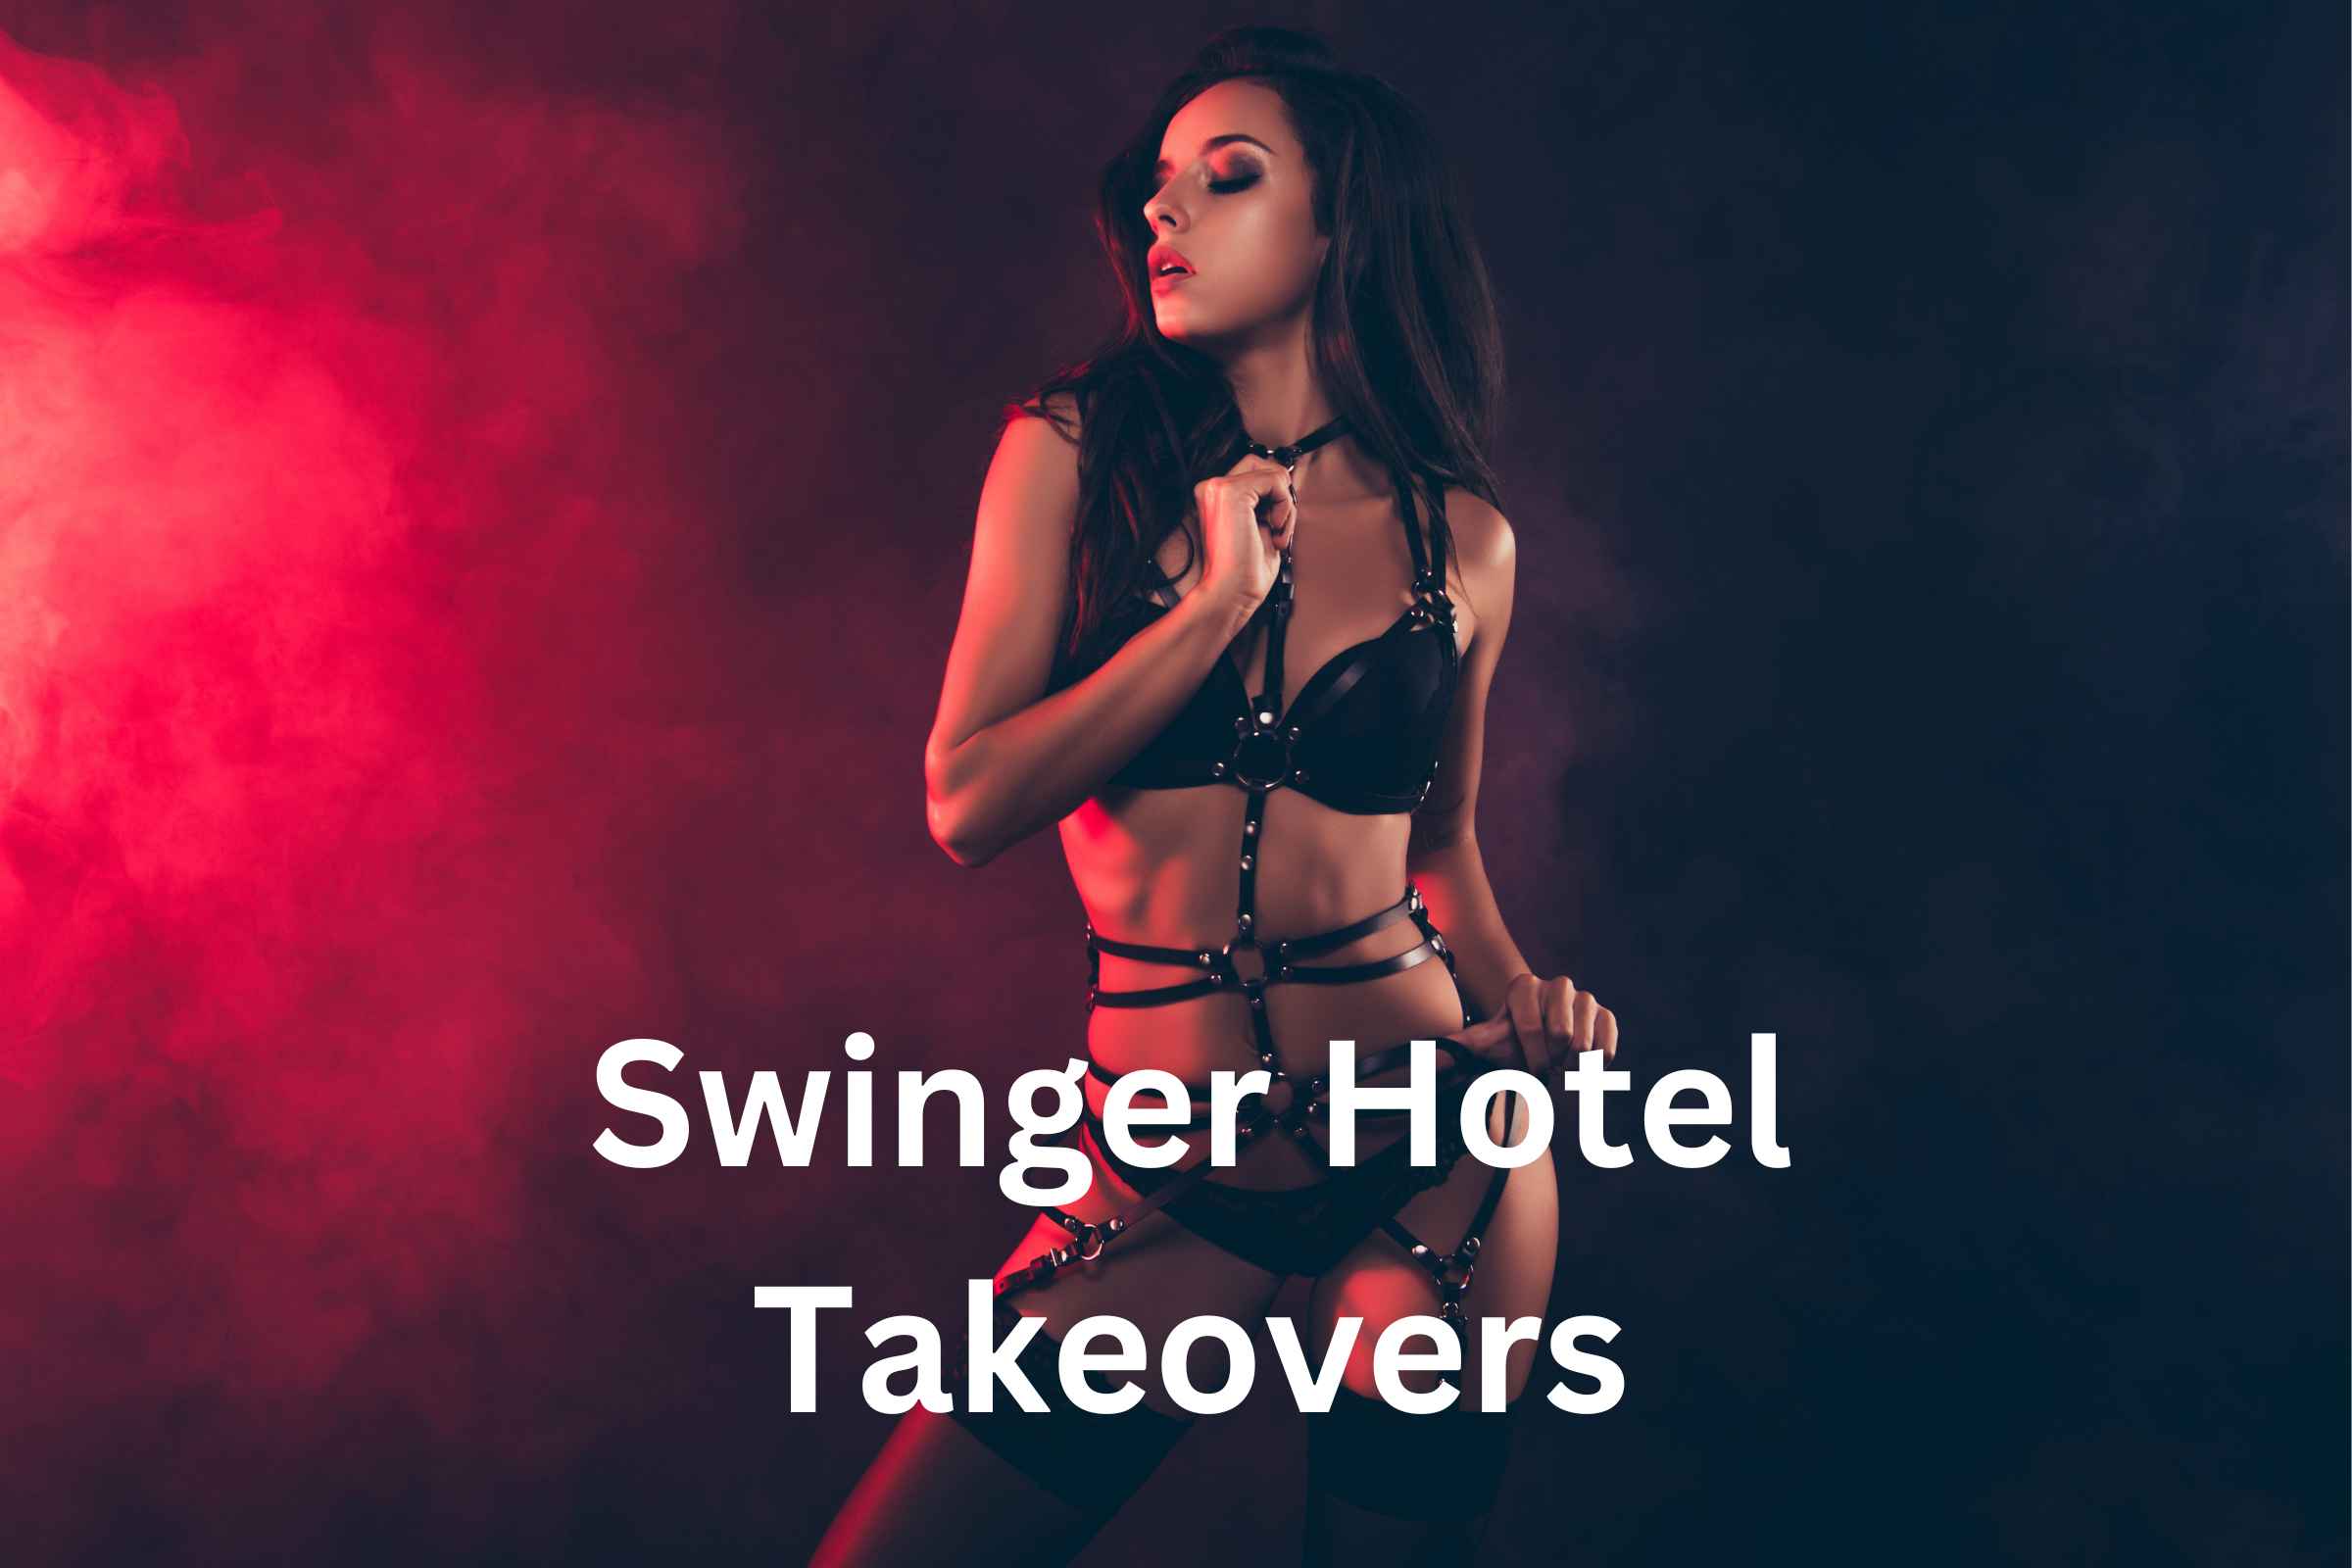 swinger activities for may 1